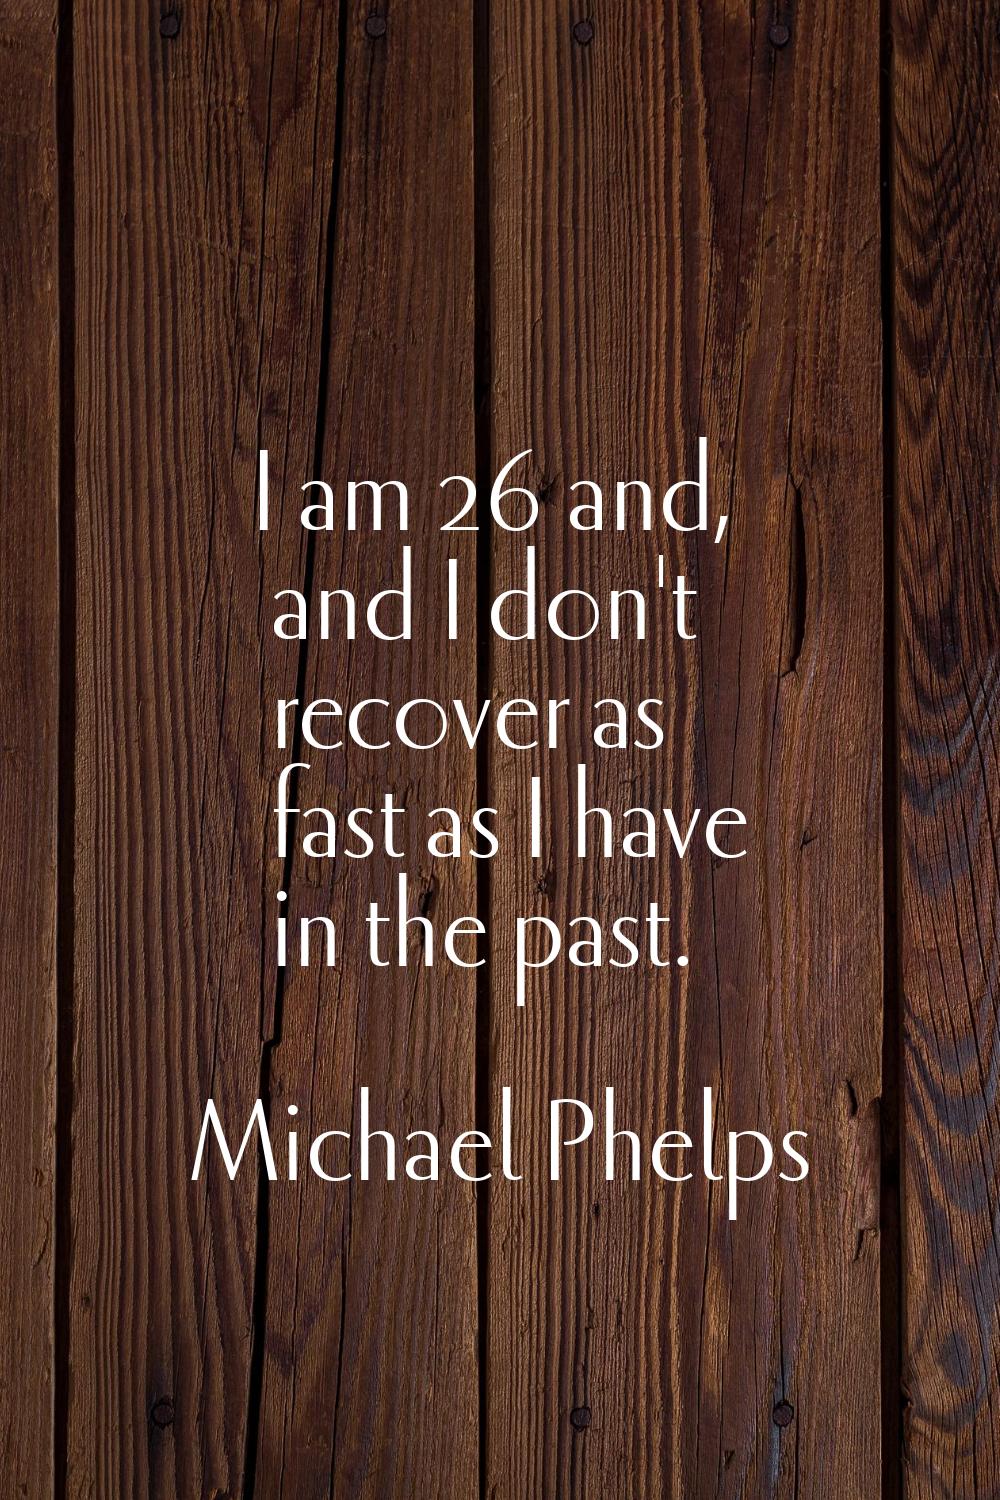 I am 26 and, and I don't recover as fast as I have in the past.